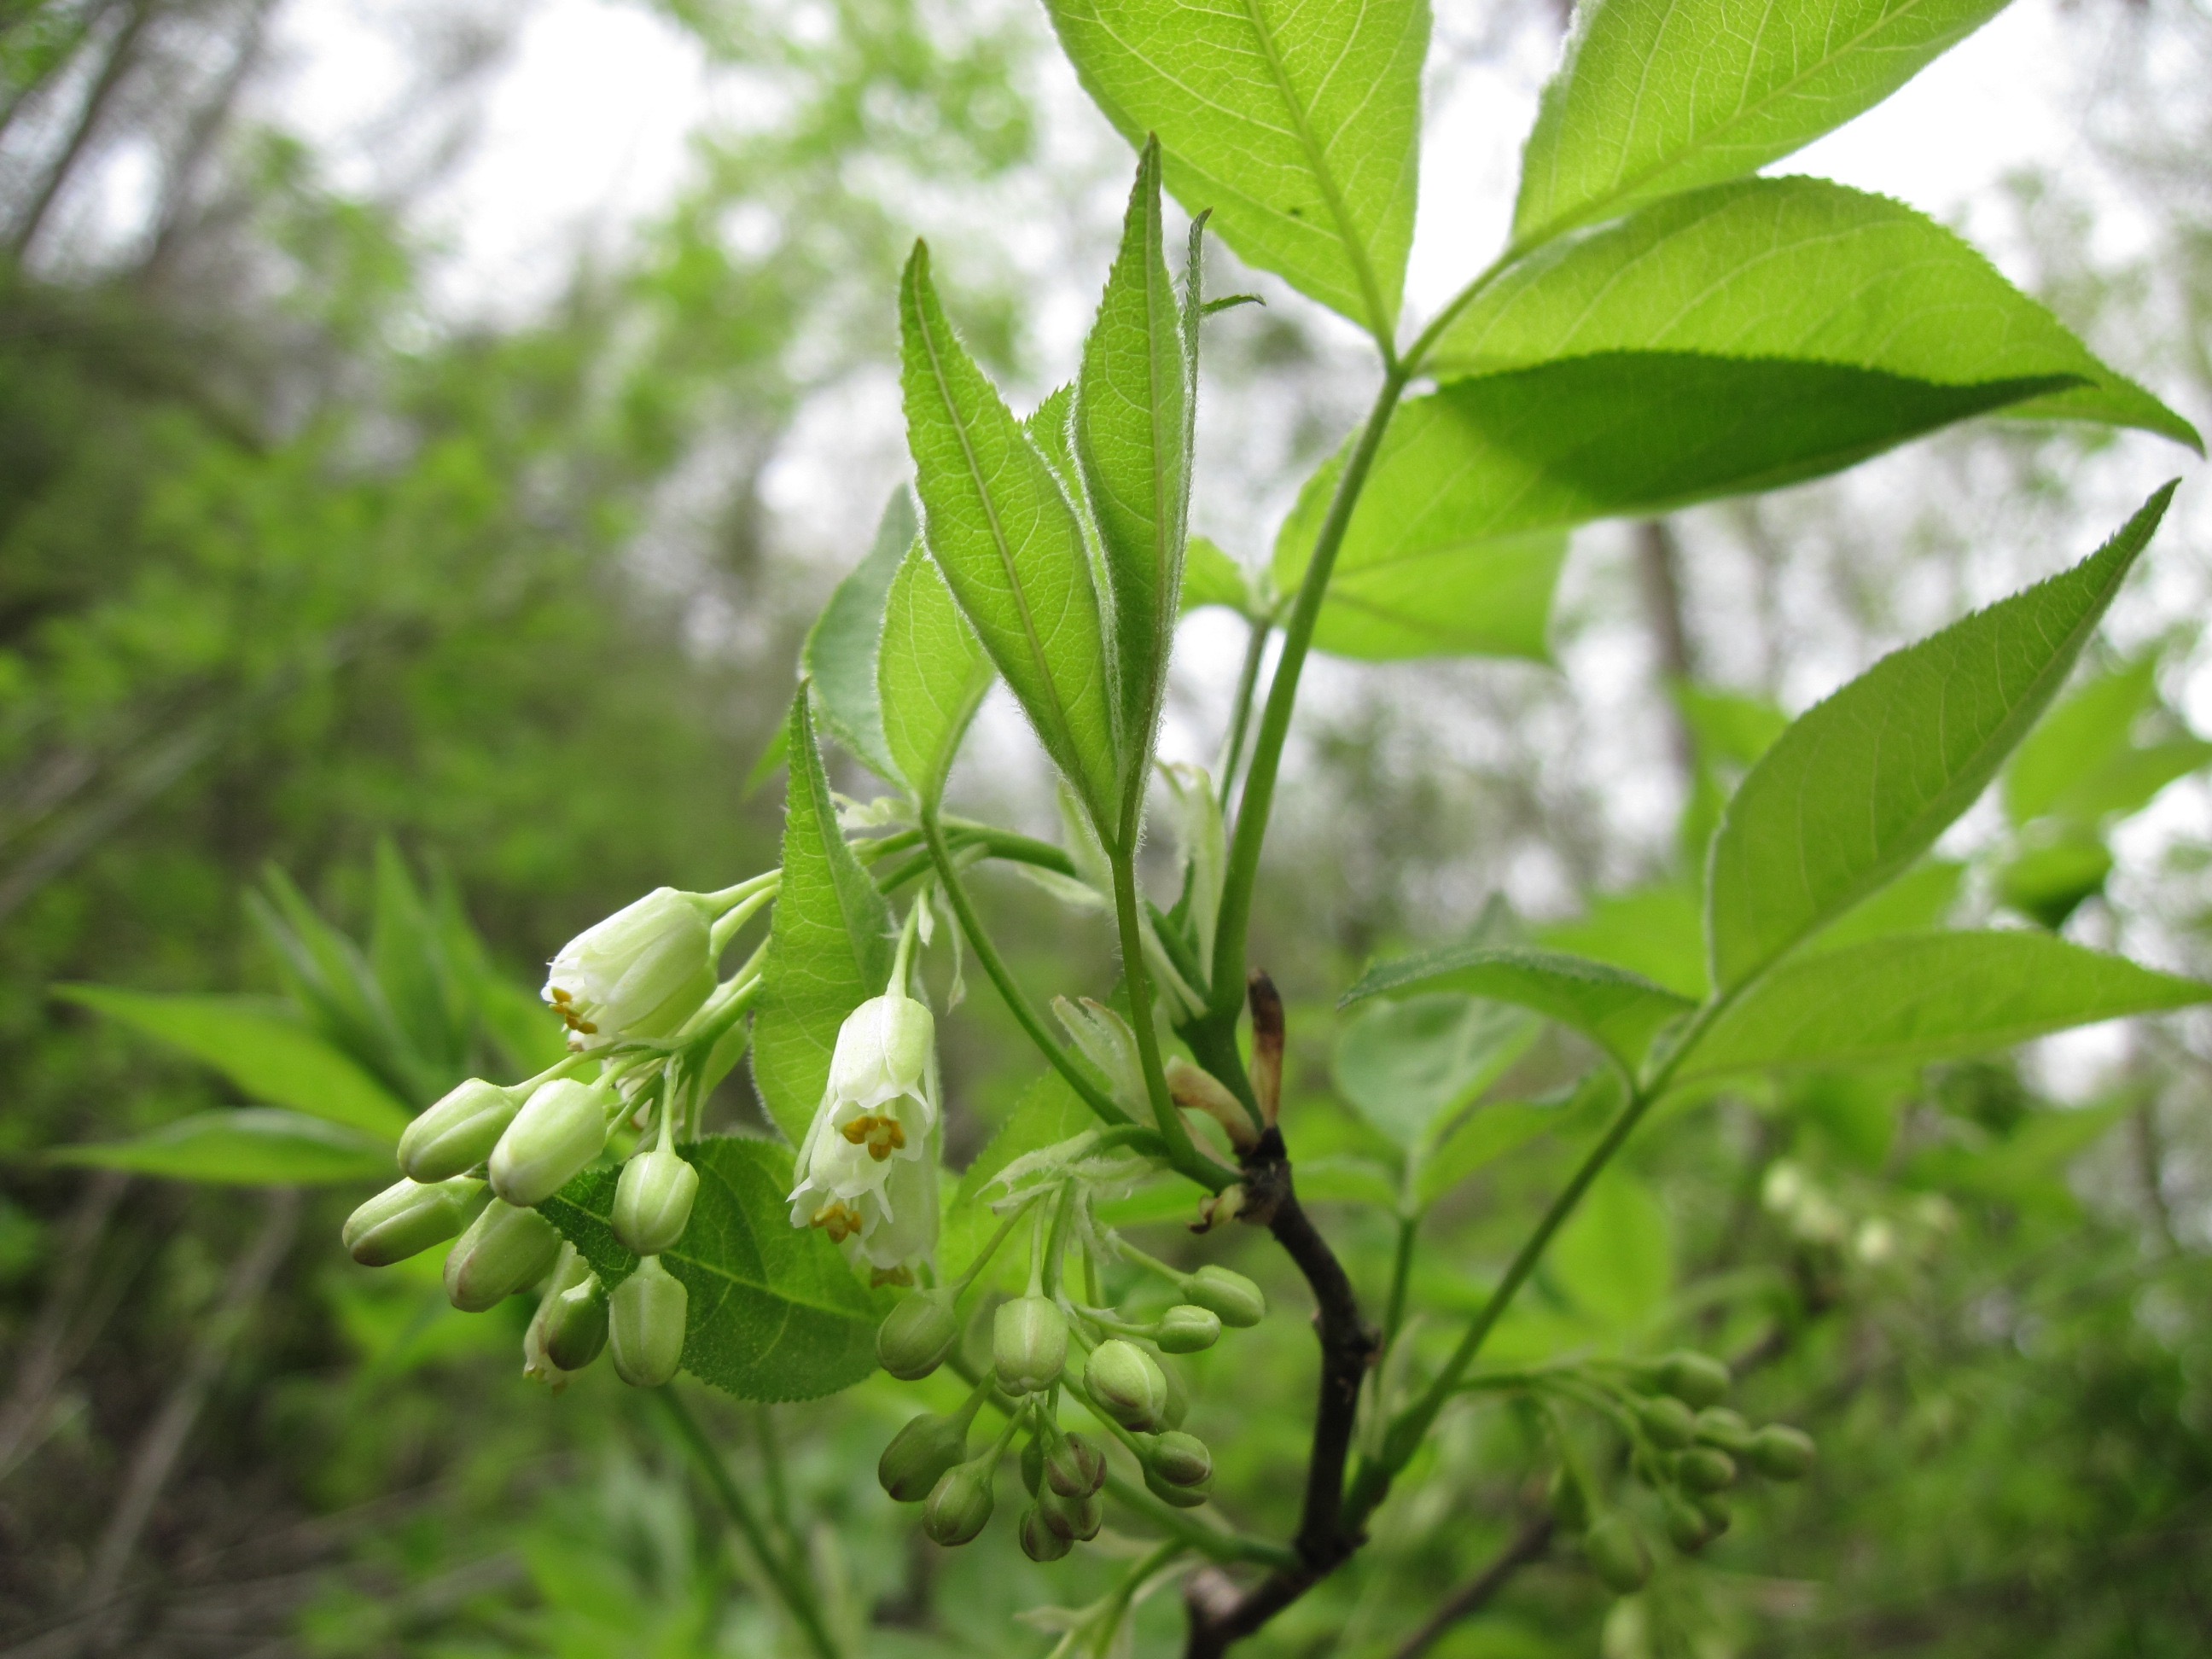 The Scientific Name is Staphylea trifolia. You will likely hear them called Bladdernut, American Bladdernut. This picture shows the Large shrub with trifoliate, opposite leaves. of Staphylea trifolia